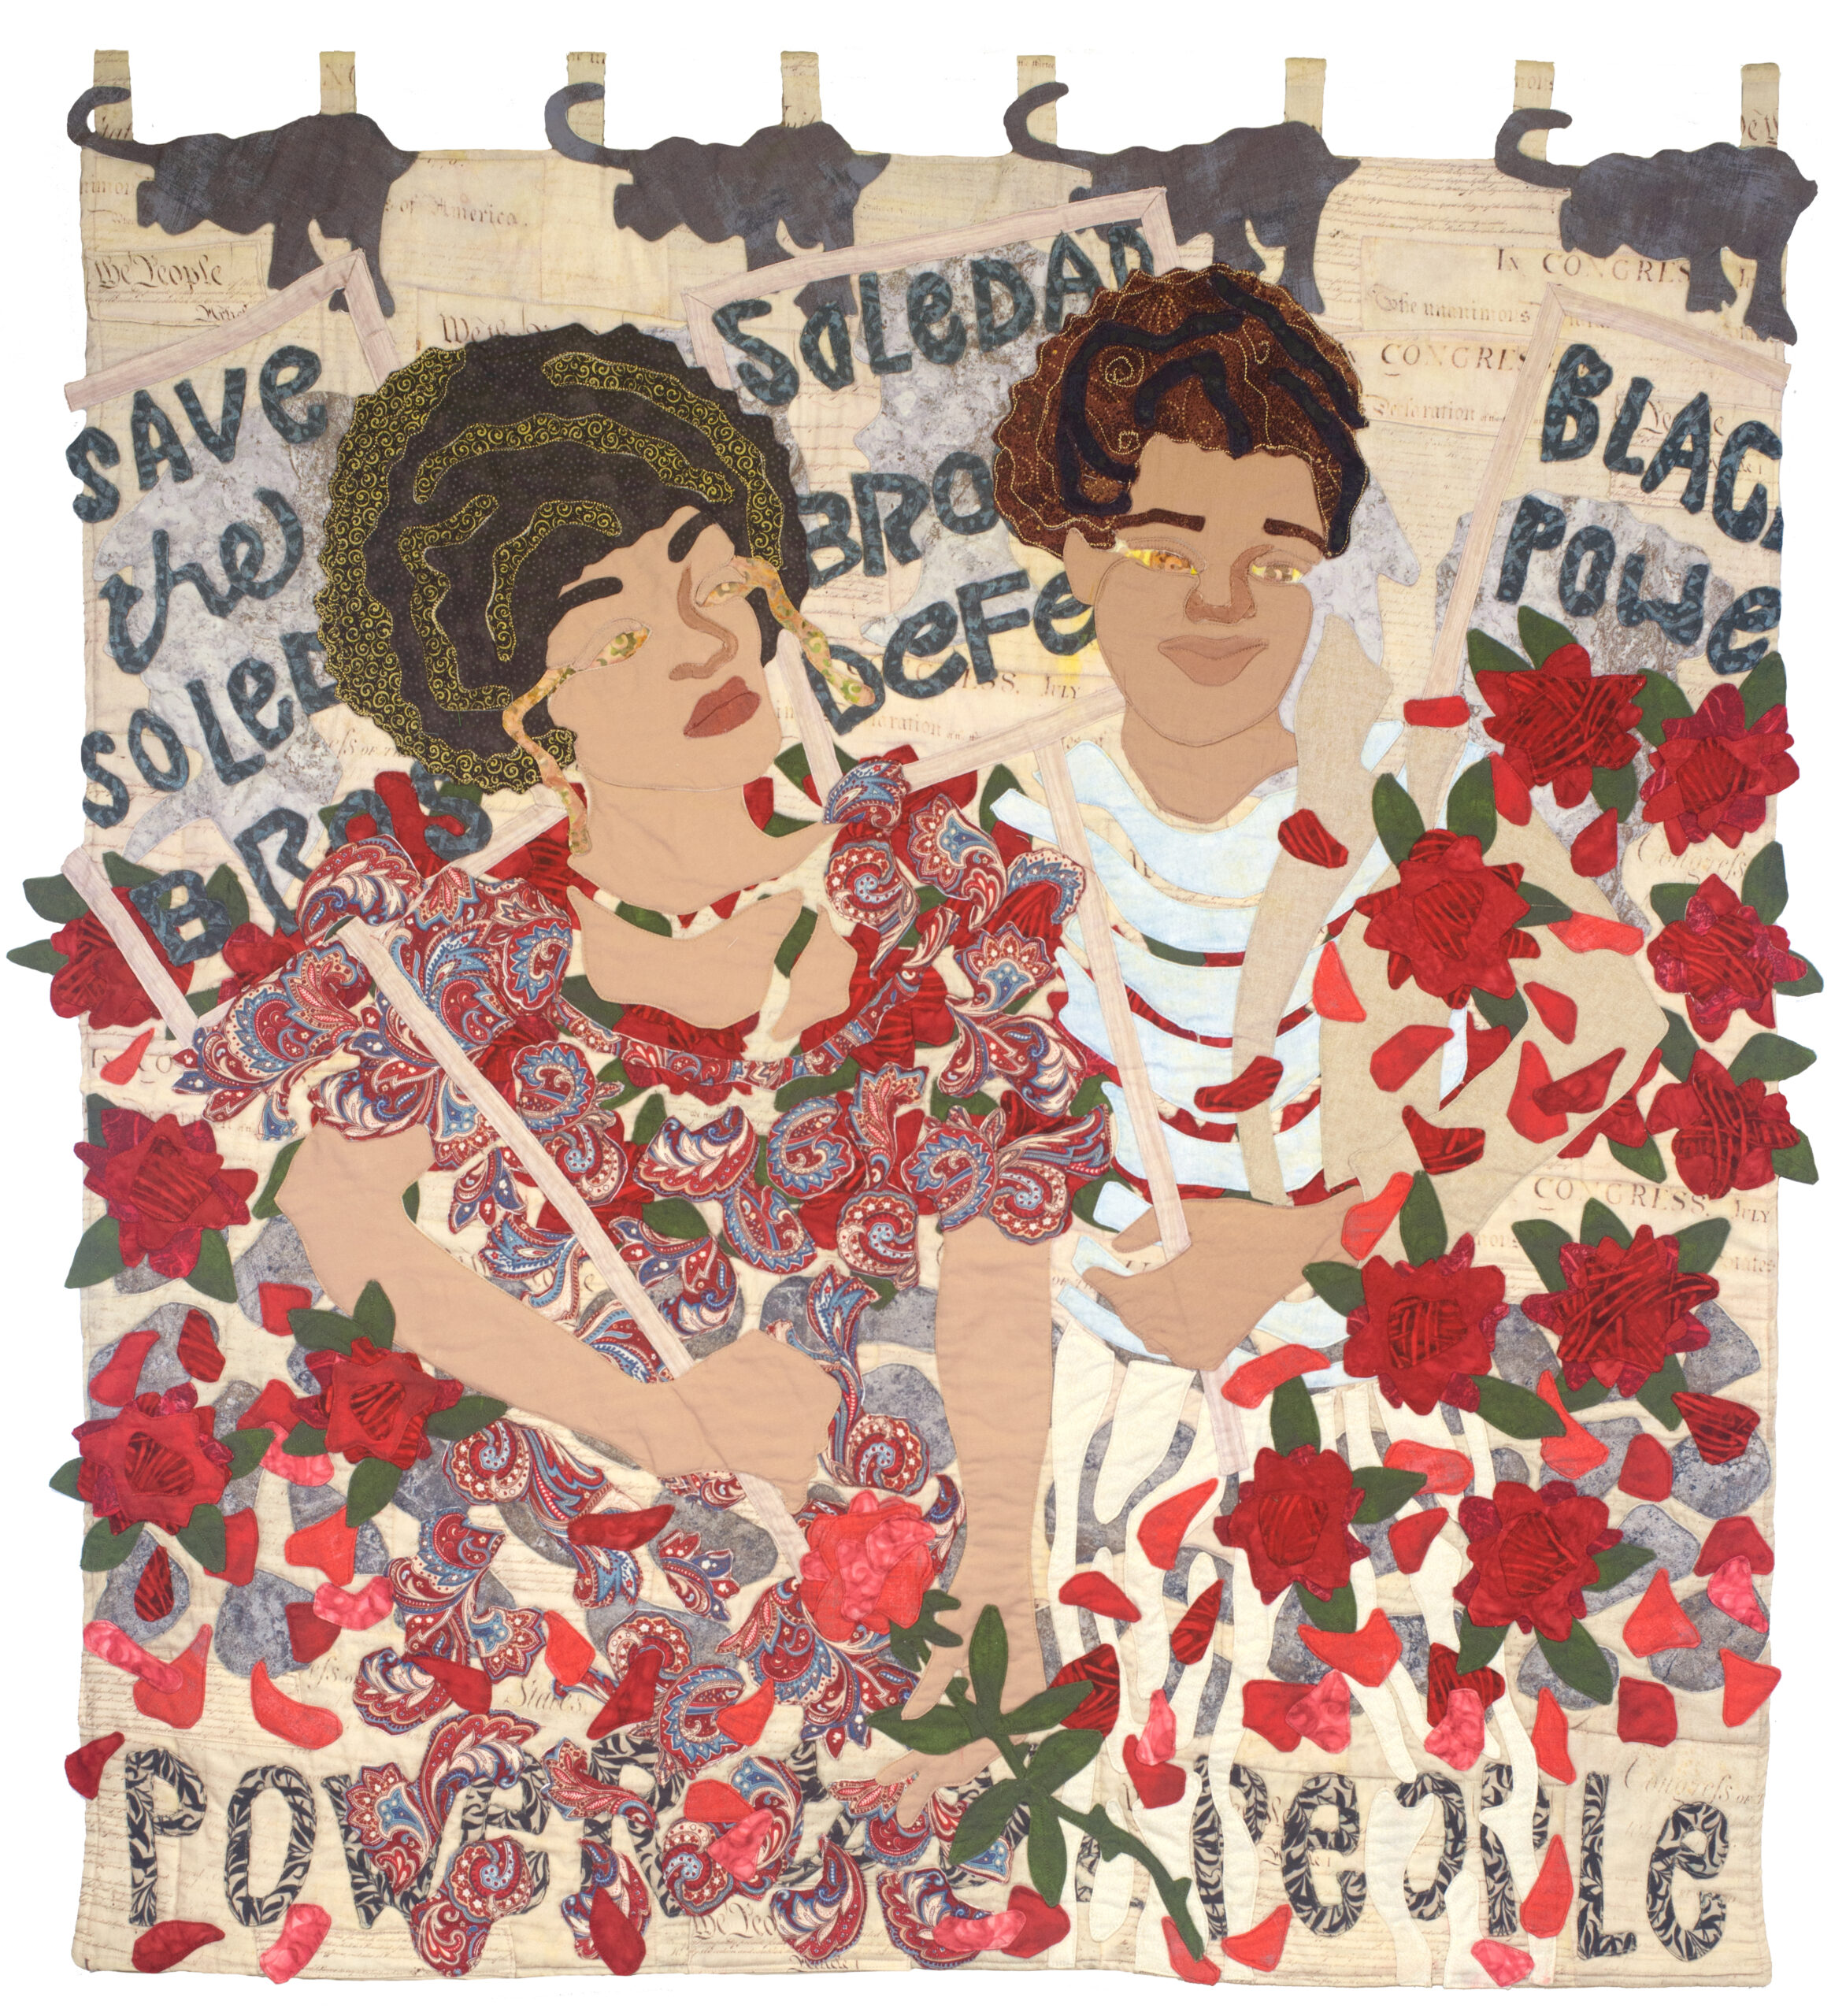 Roses for Angela, 1971
Stitched fabric
46″ x 42″
2021
$4,800